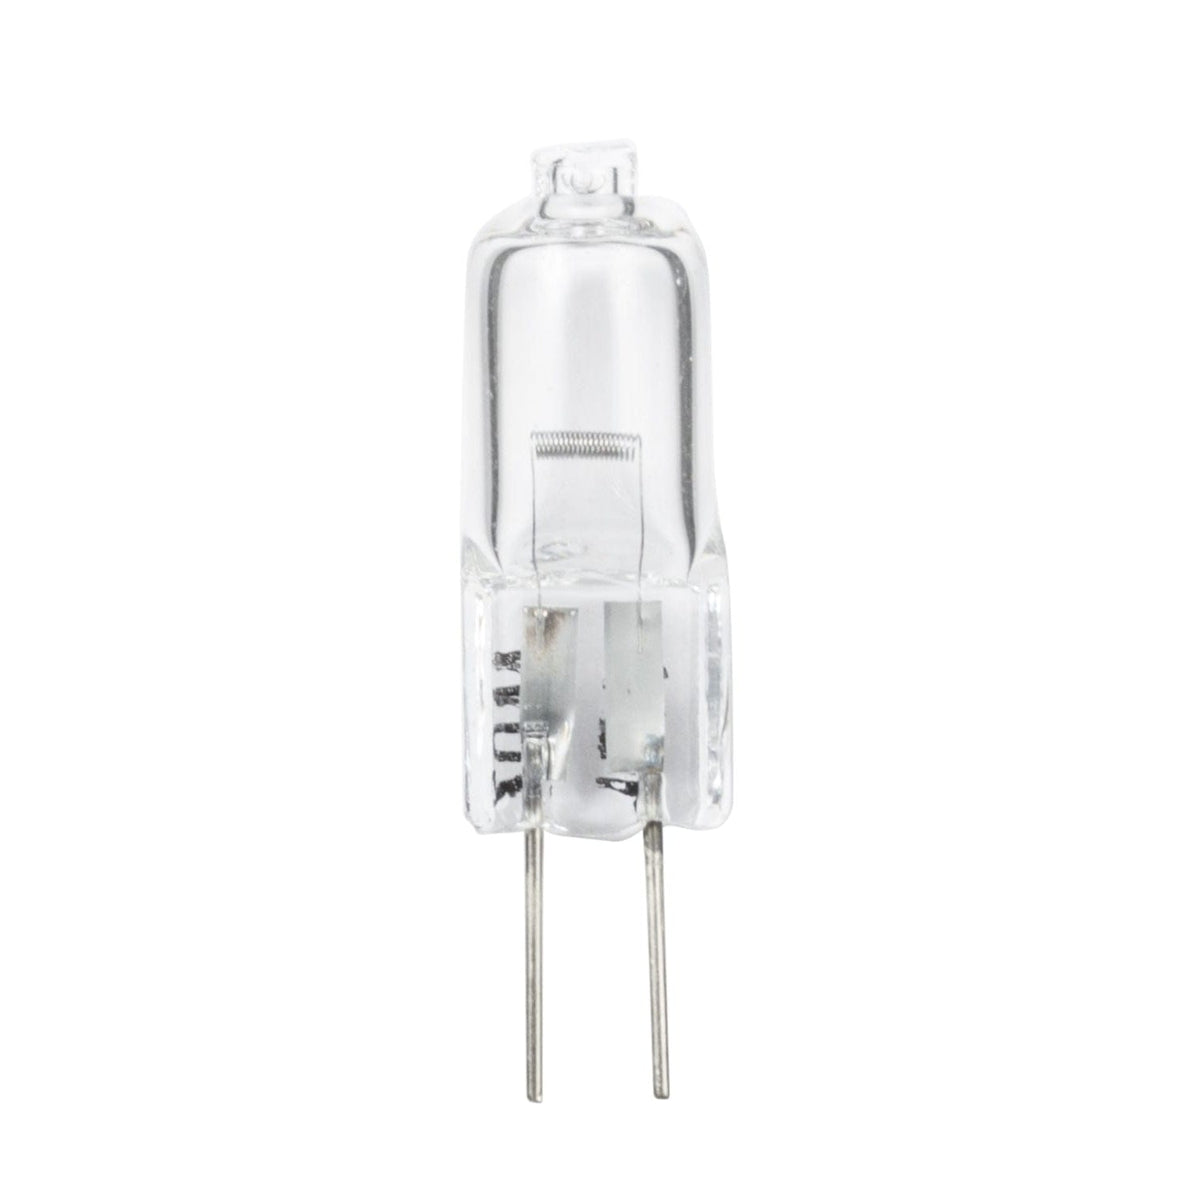 Ancor Qualifies for Free Shipping Ancor Halogen Bulb 2-pk #529371